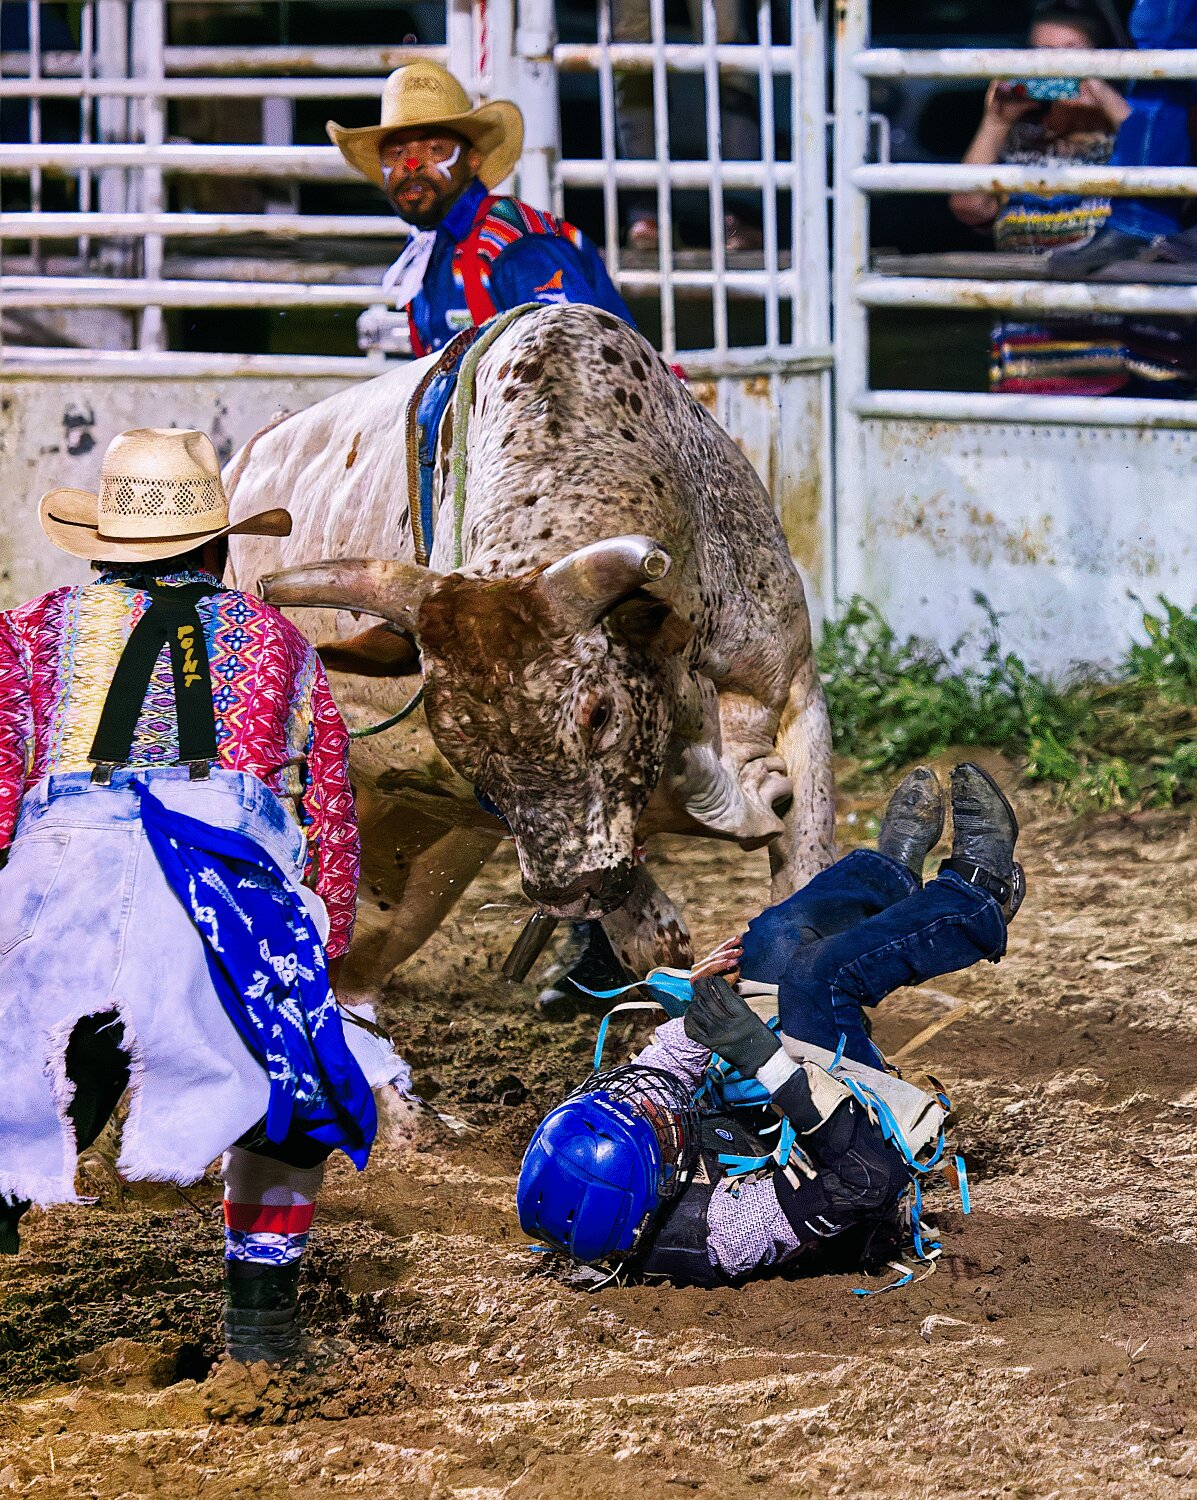 This moment reminds one that in bull riding, split-second decisions matter. The rider and clowns managed to avoid any serious injuries Friday night at the 60th annual Mineola Fire Dept. Rodeo. [see more sights and MFDR 2023 rodeo action]